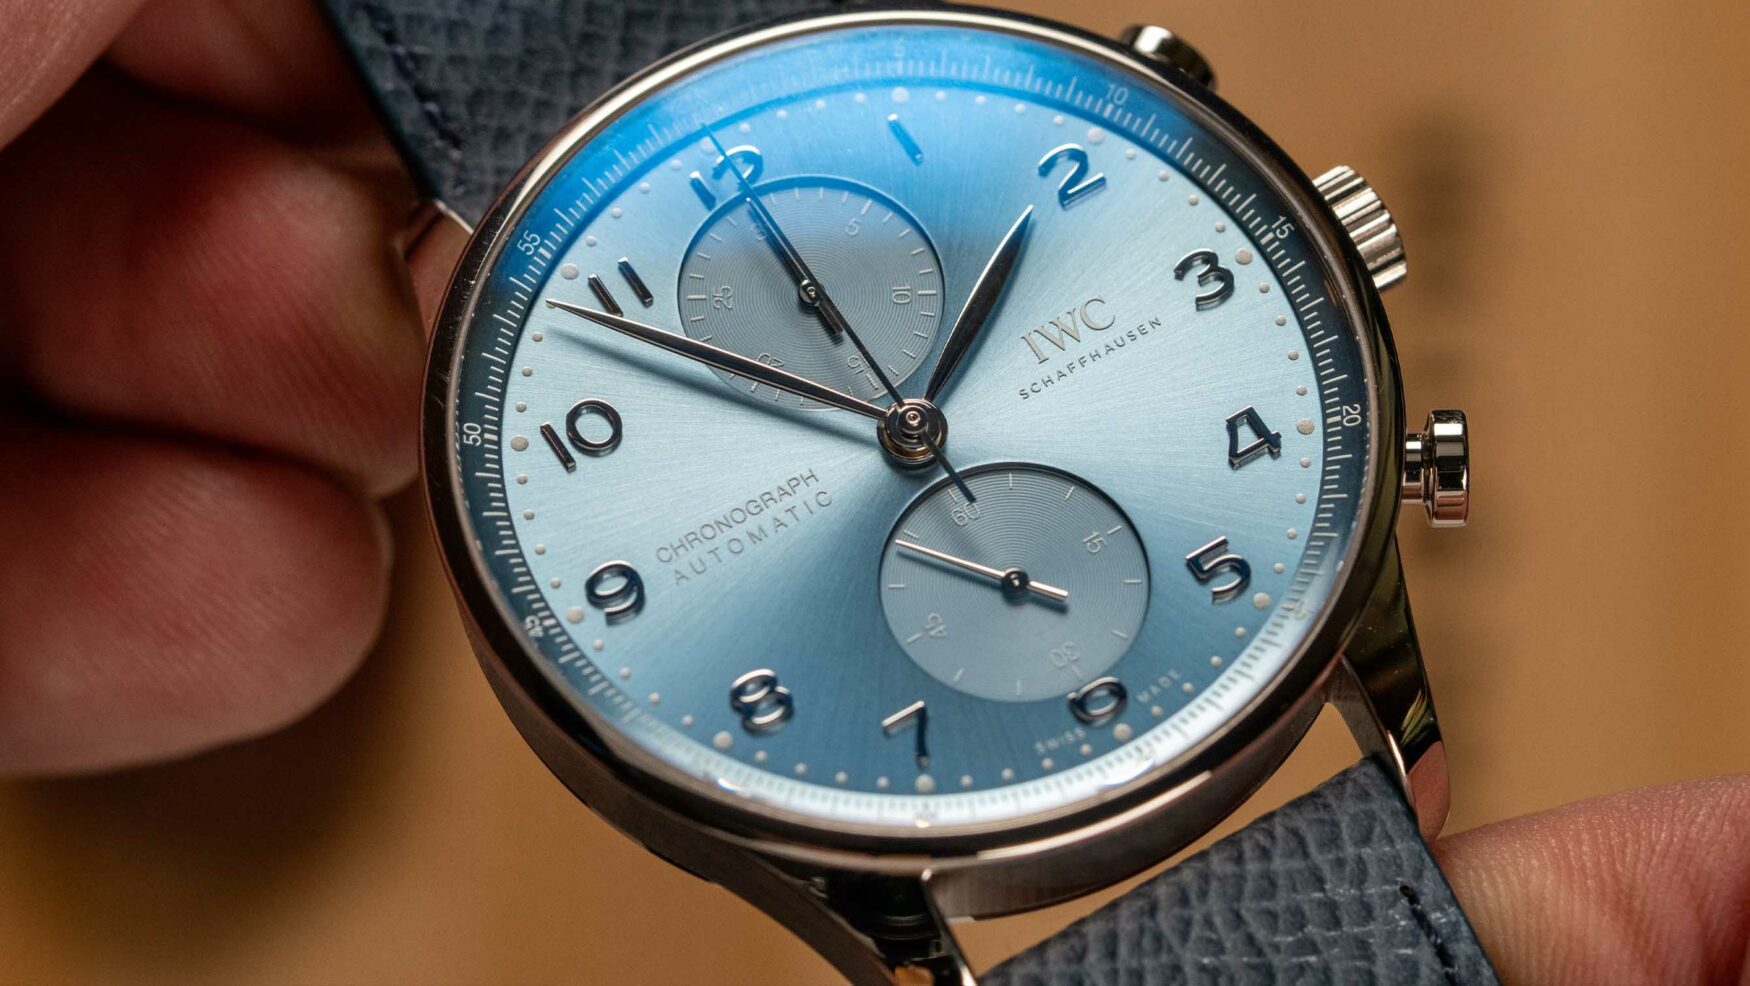 A playful yet respectful new colour for the IWC Portugieser Chronograph